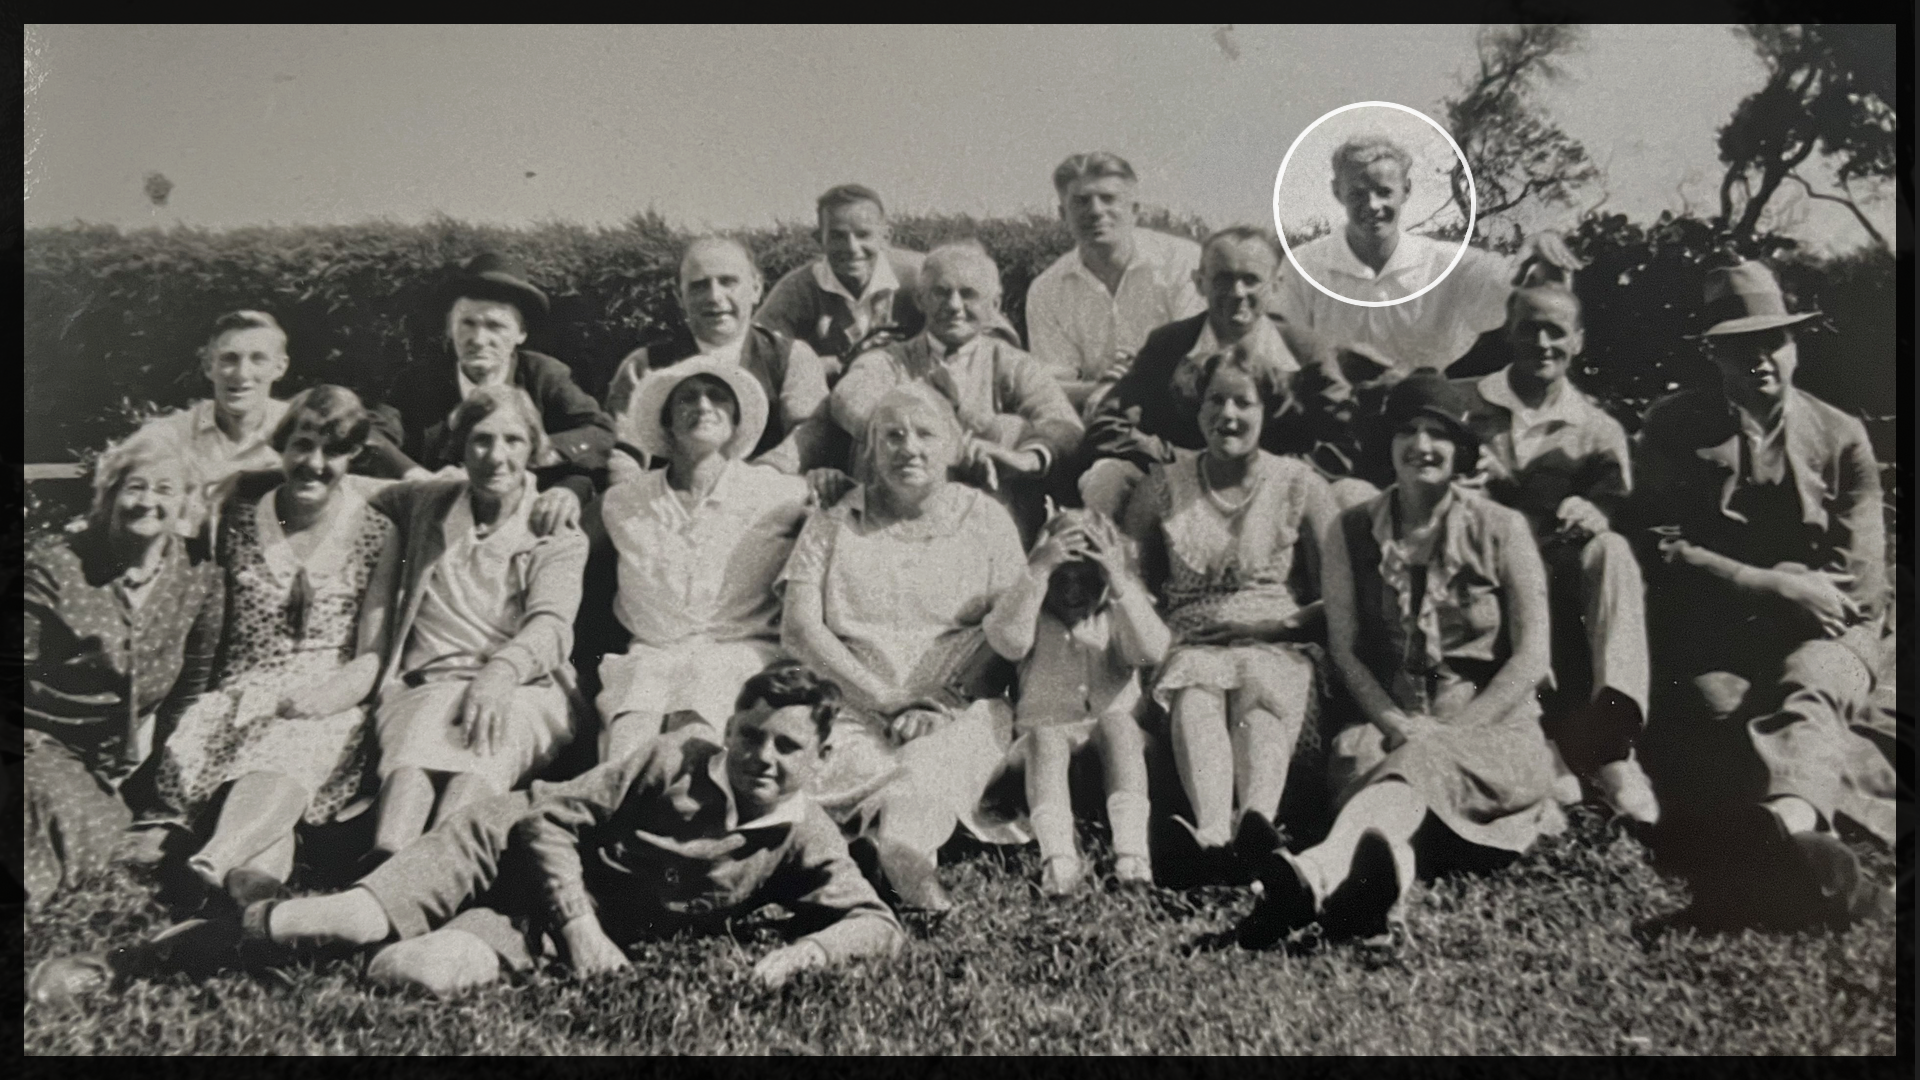 Black and white large family group photo from early 1900s. A man is circled patting his hand on another man's head as a joke